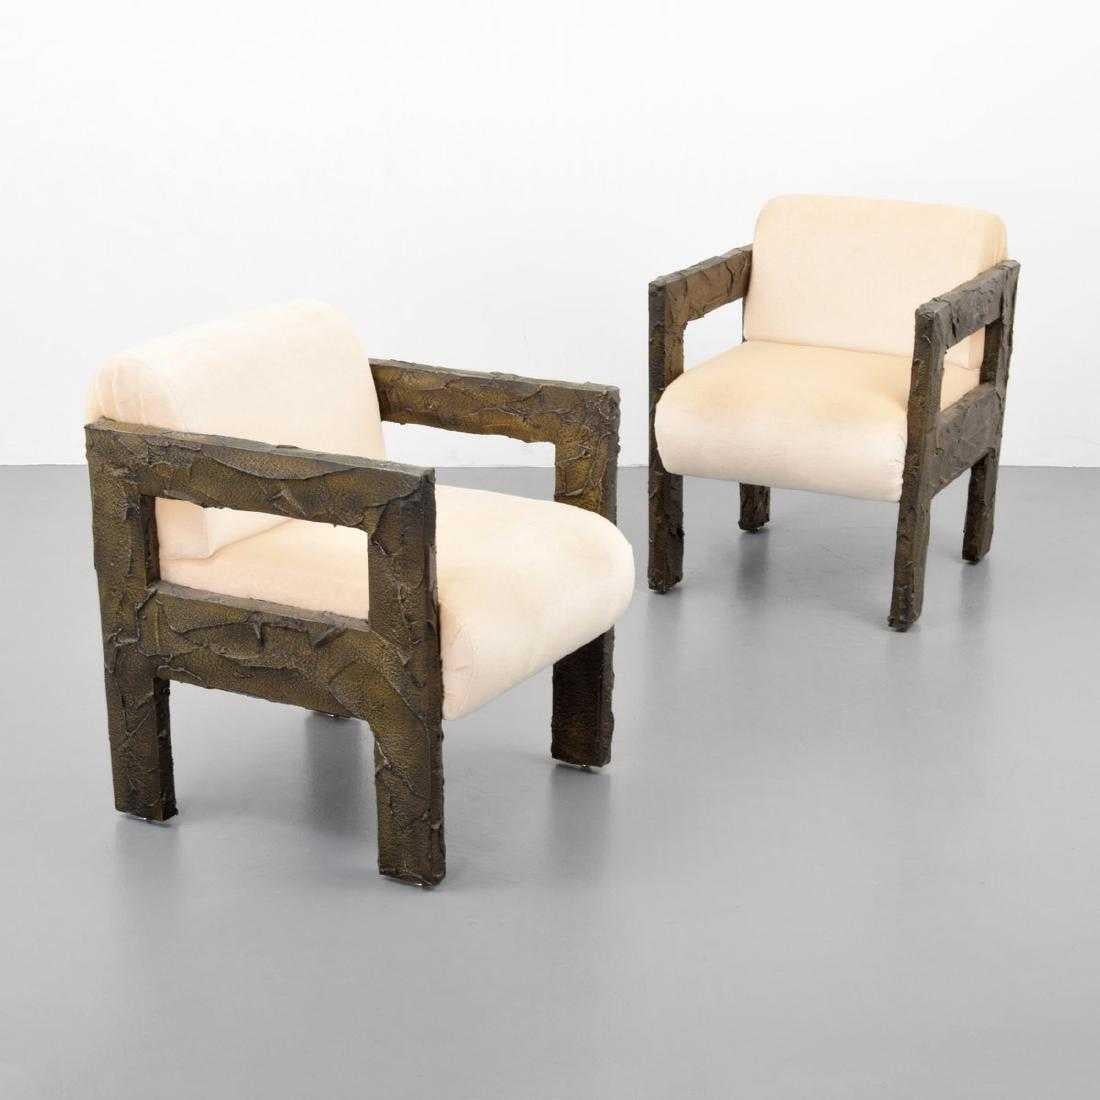 Pair of sculpted bronze lounge chairs by Paul Evans for Paul Evans Studio. Chairs are accompanied by a Letter of Provenance issued by Dorsey Reading, dated 11.16.2018.

Materials: bronze resin, upholstery.
 